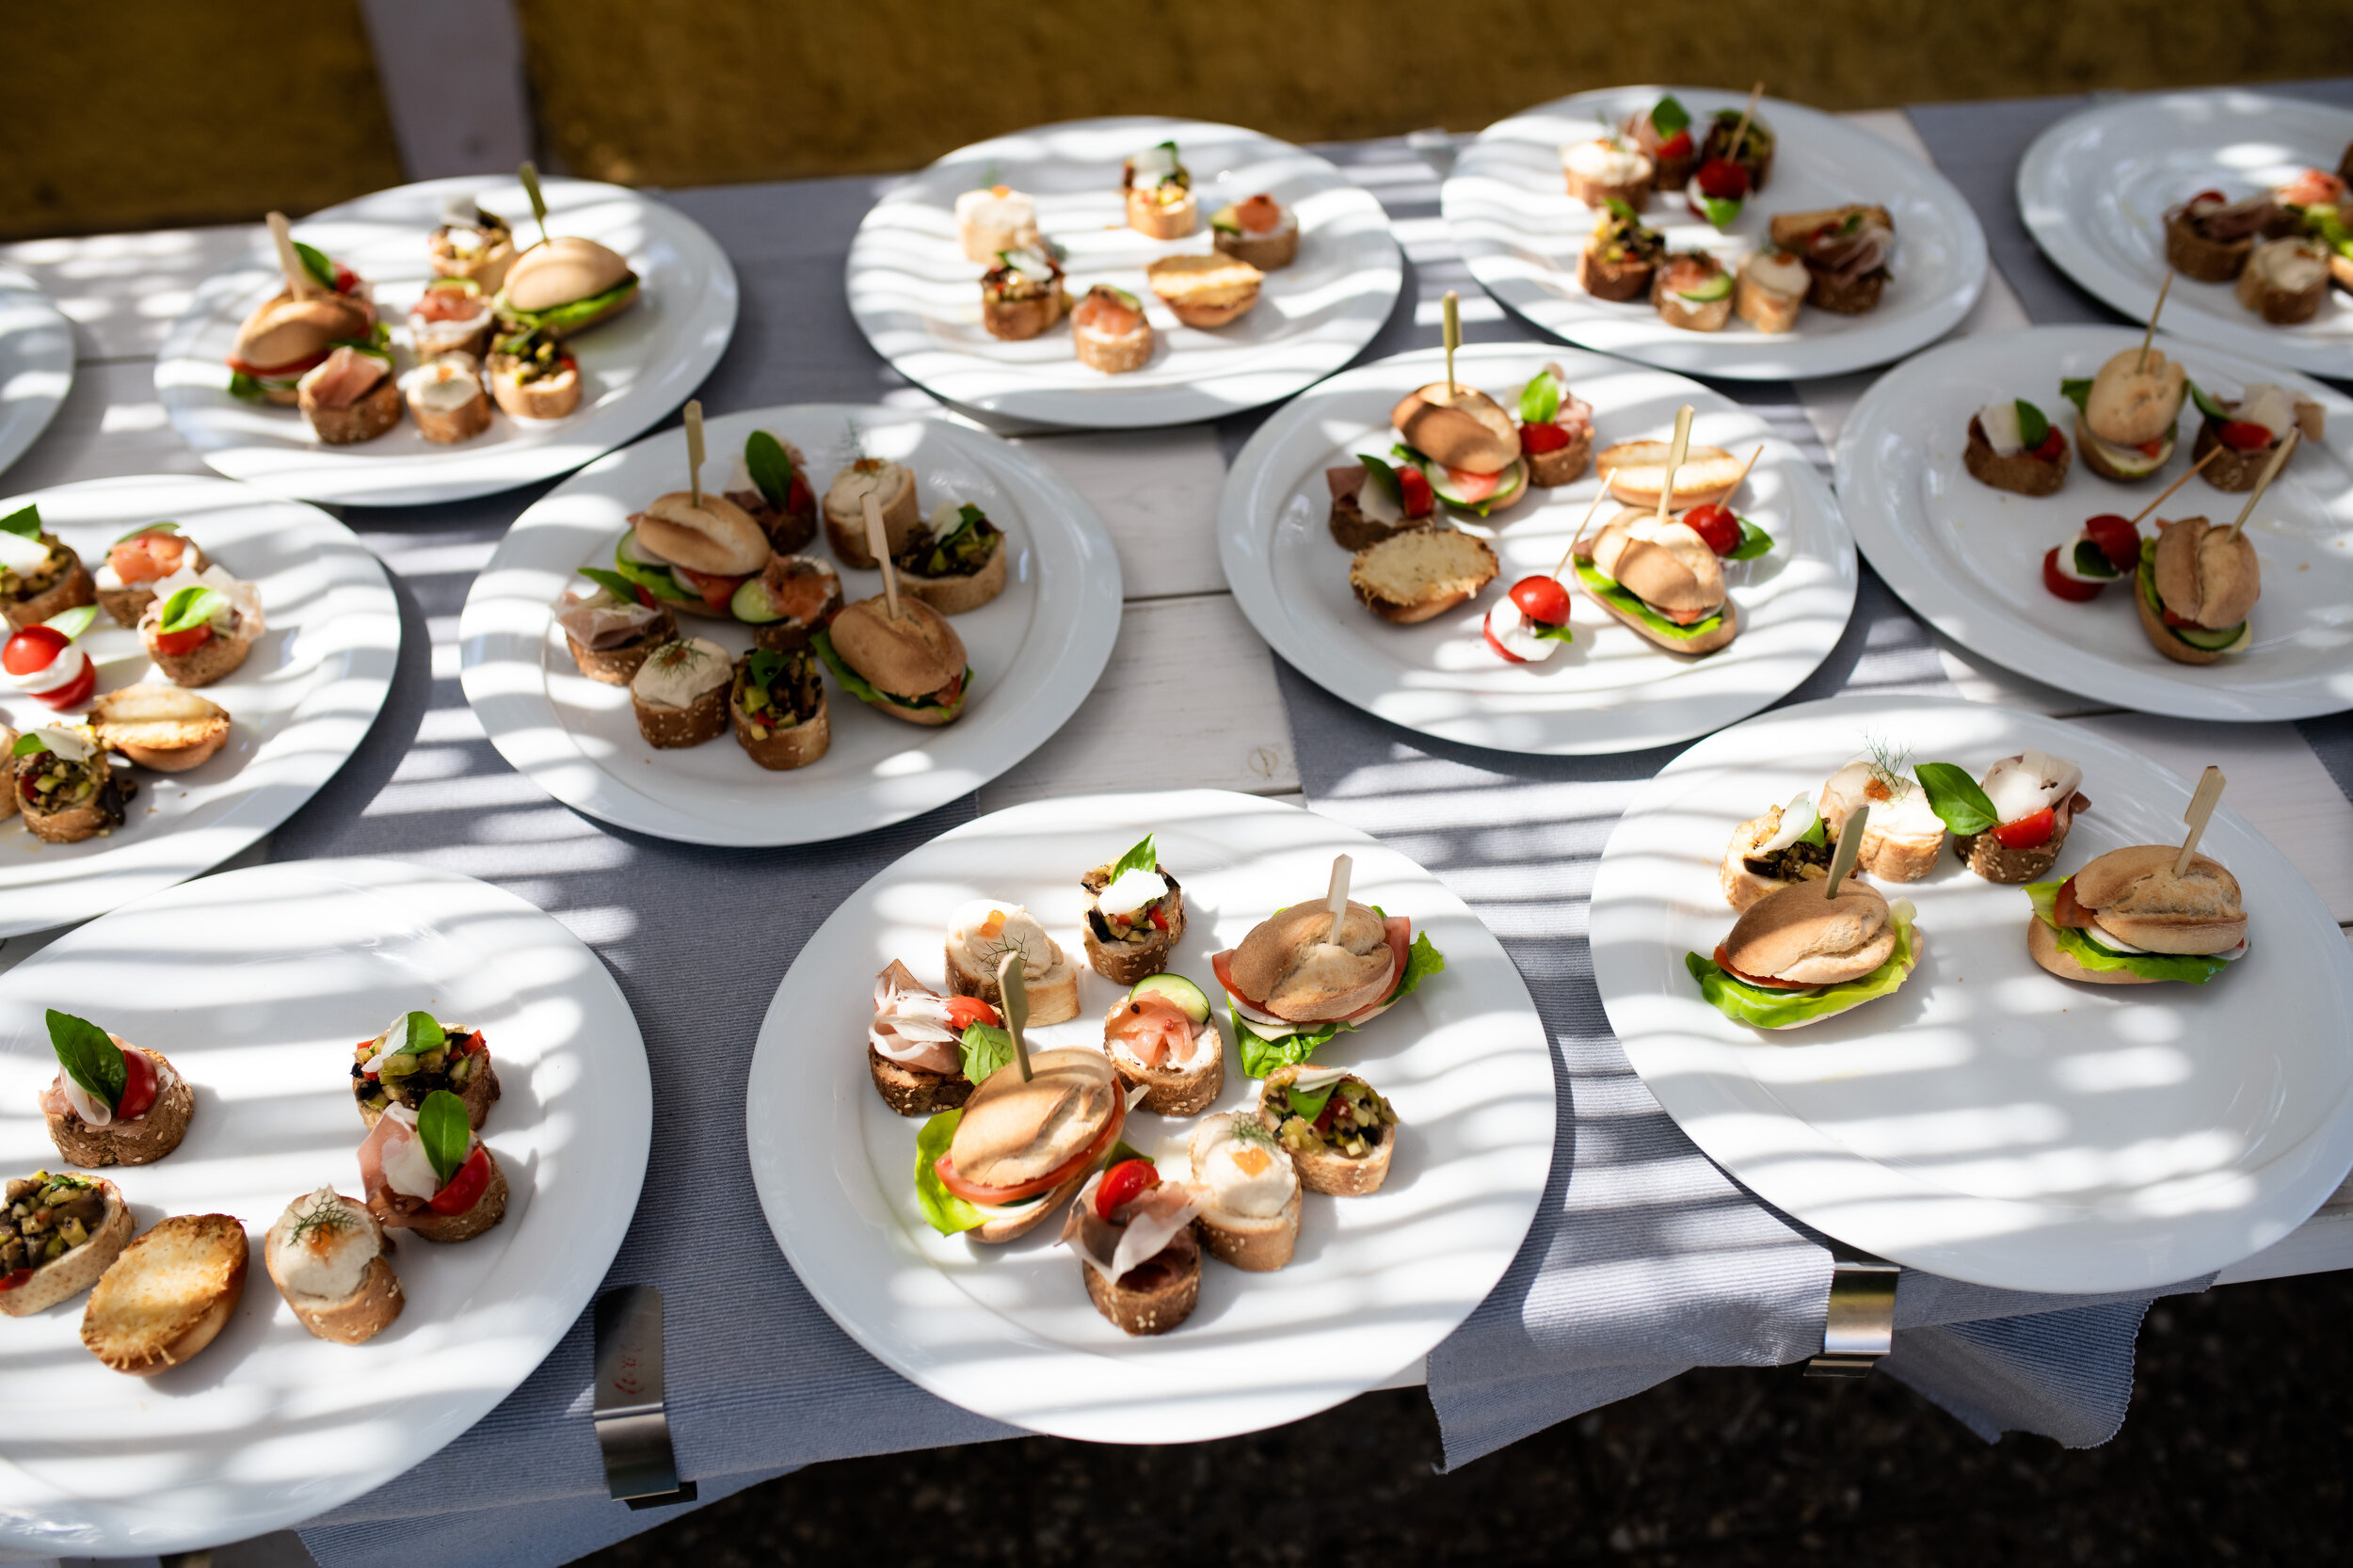 Appetizers during lunch at Paltsi Beach:  photo of destination wedding in Greece by J. Brown Photography.